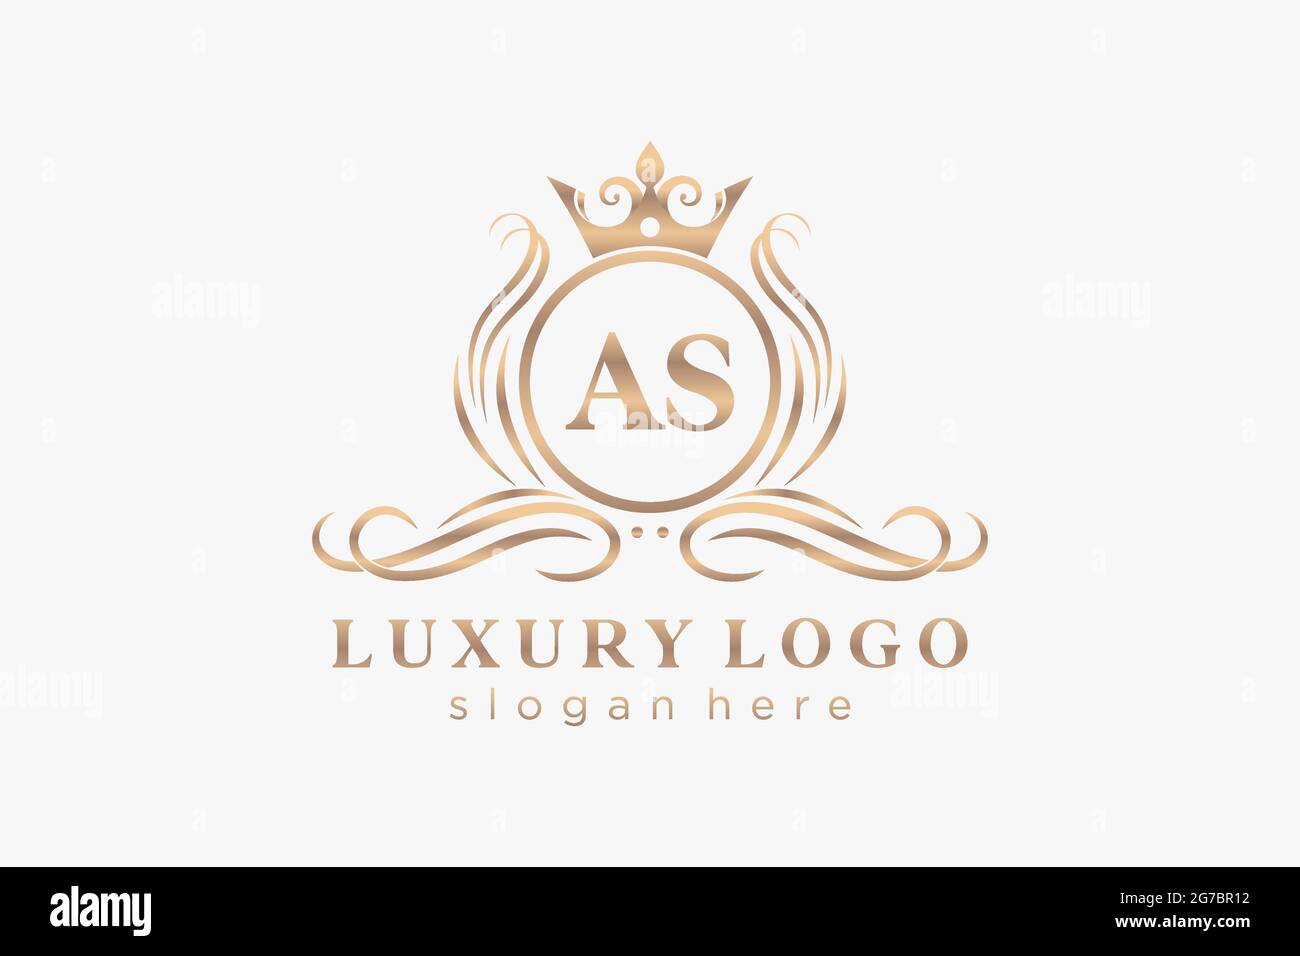 AS Letter Royal Luxury Logo template in vector art for Restaurant, Royalty, Boutique, Cafe, Hotel, Heraldic, Jewelry, Fashion and other vector illustr Stock Vector